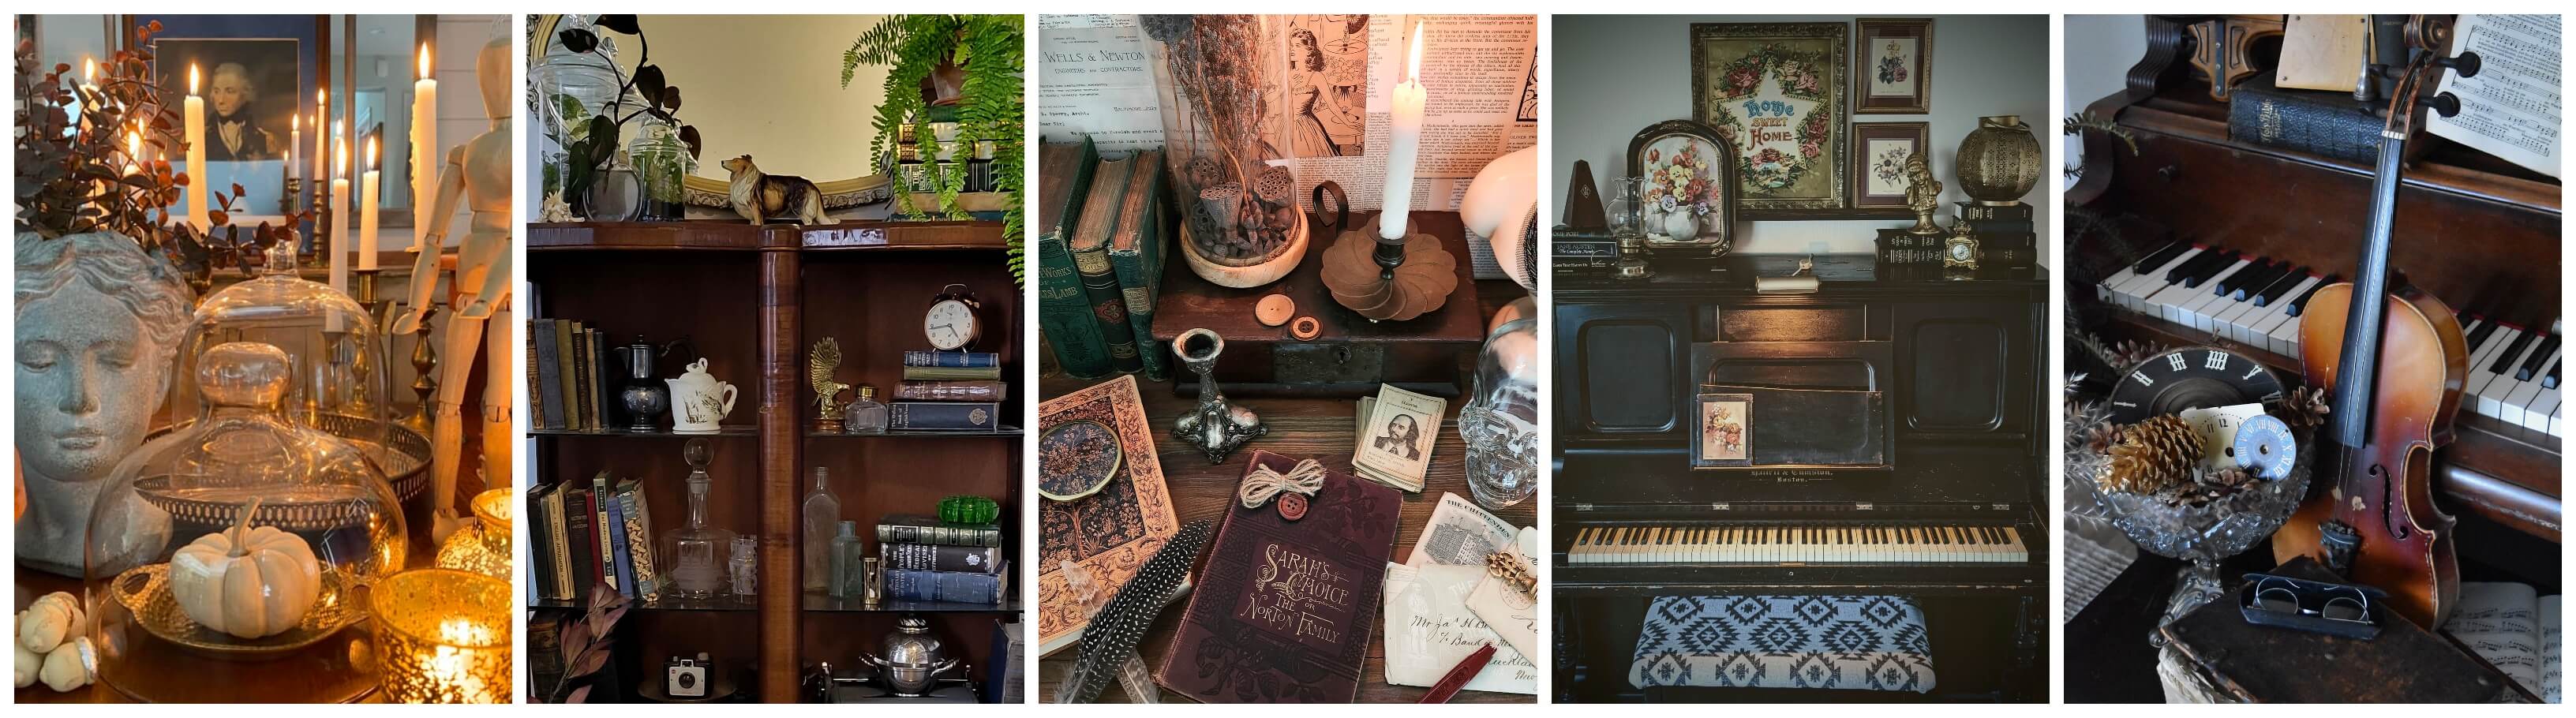 Dark Academia Decor, Yes Please! – Hunting for Vintage